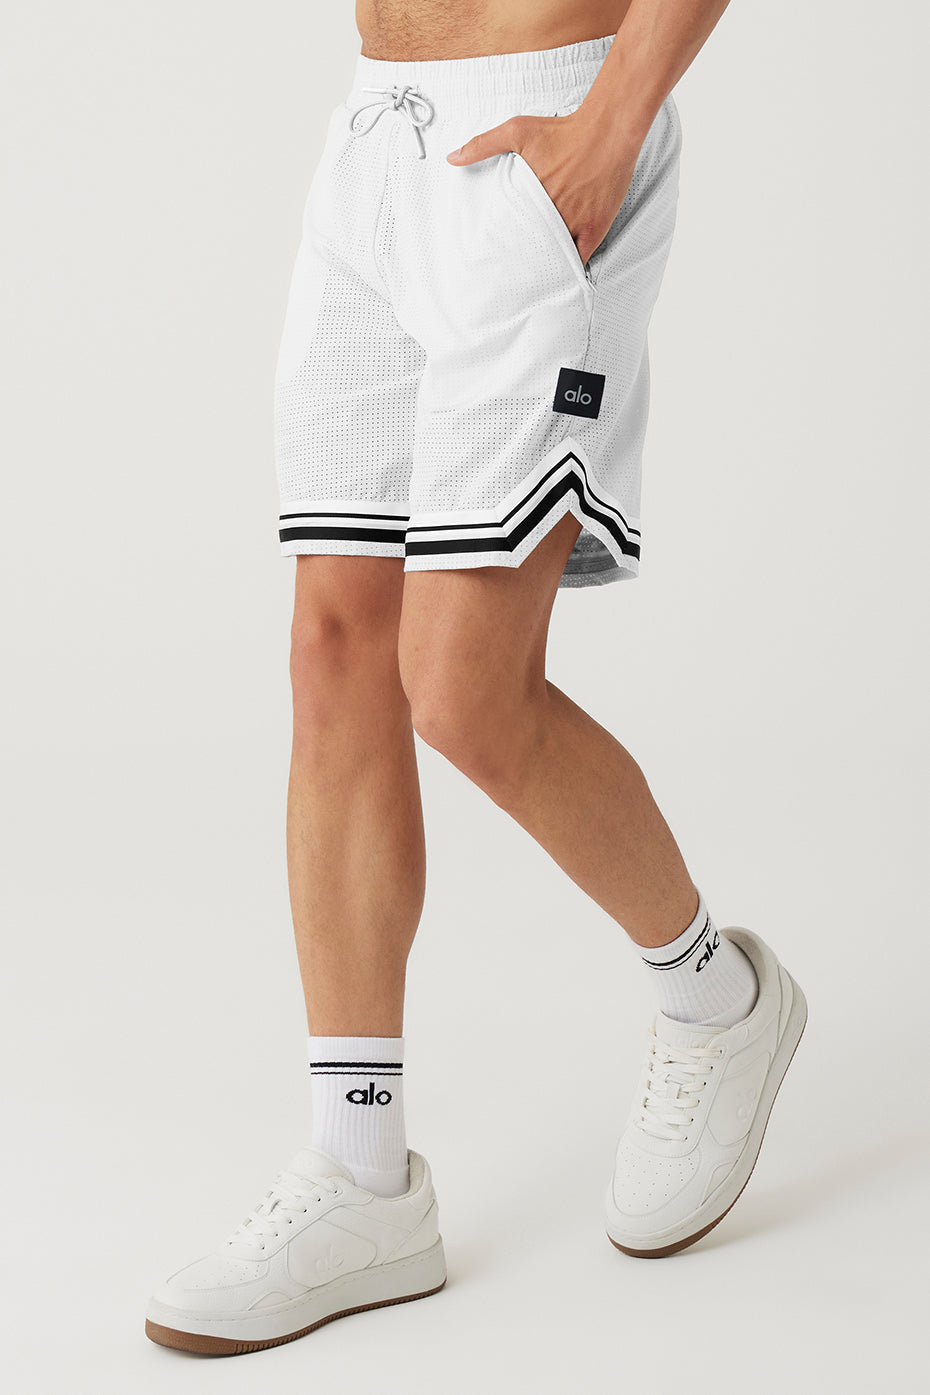 9' Traction Arena Short - White